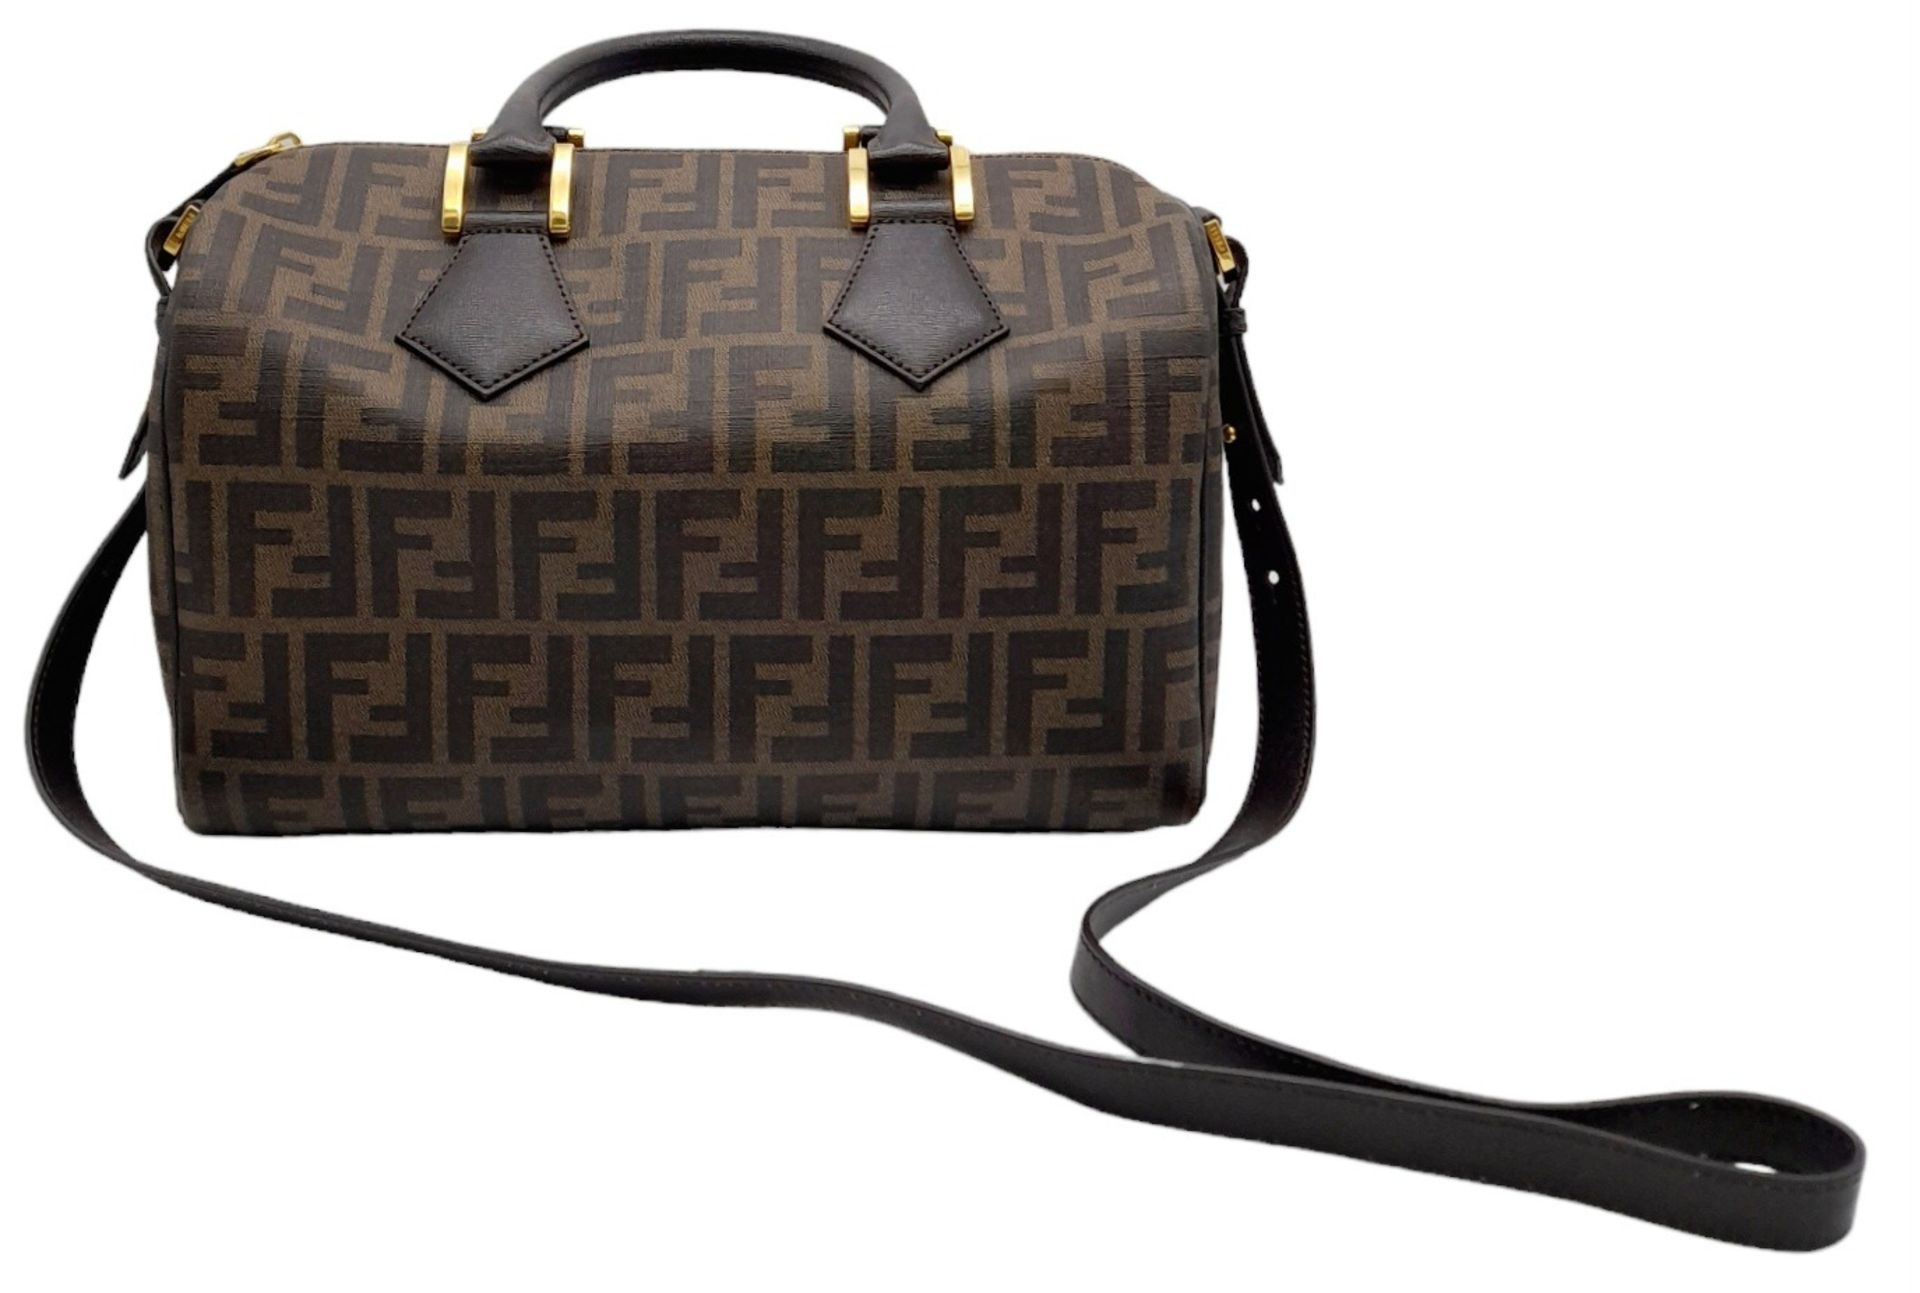 A Fendi Zucca Canvas Boston Bag. Canvas exterior, gold-tone hardware, adjustable strap, zipped top - Image 2 of 9